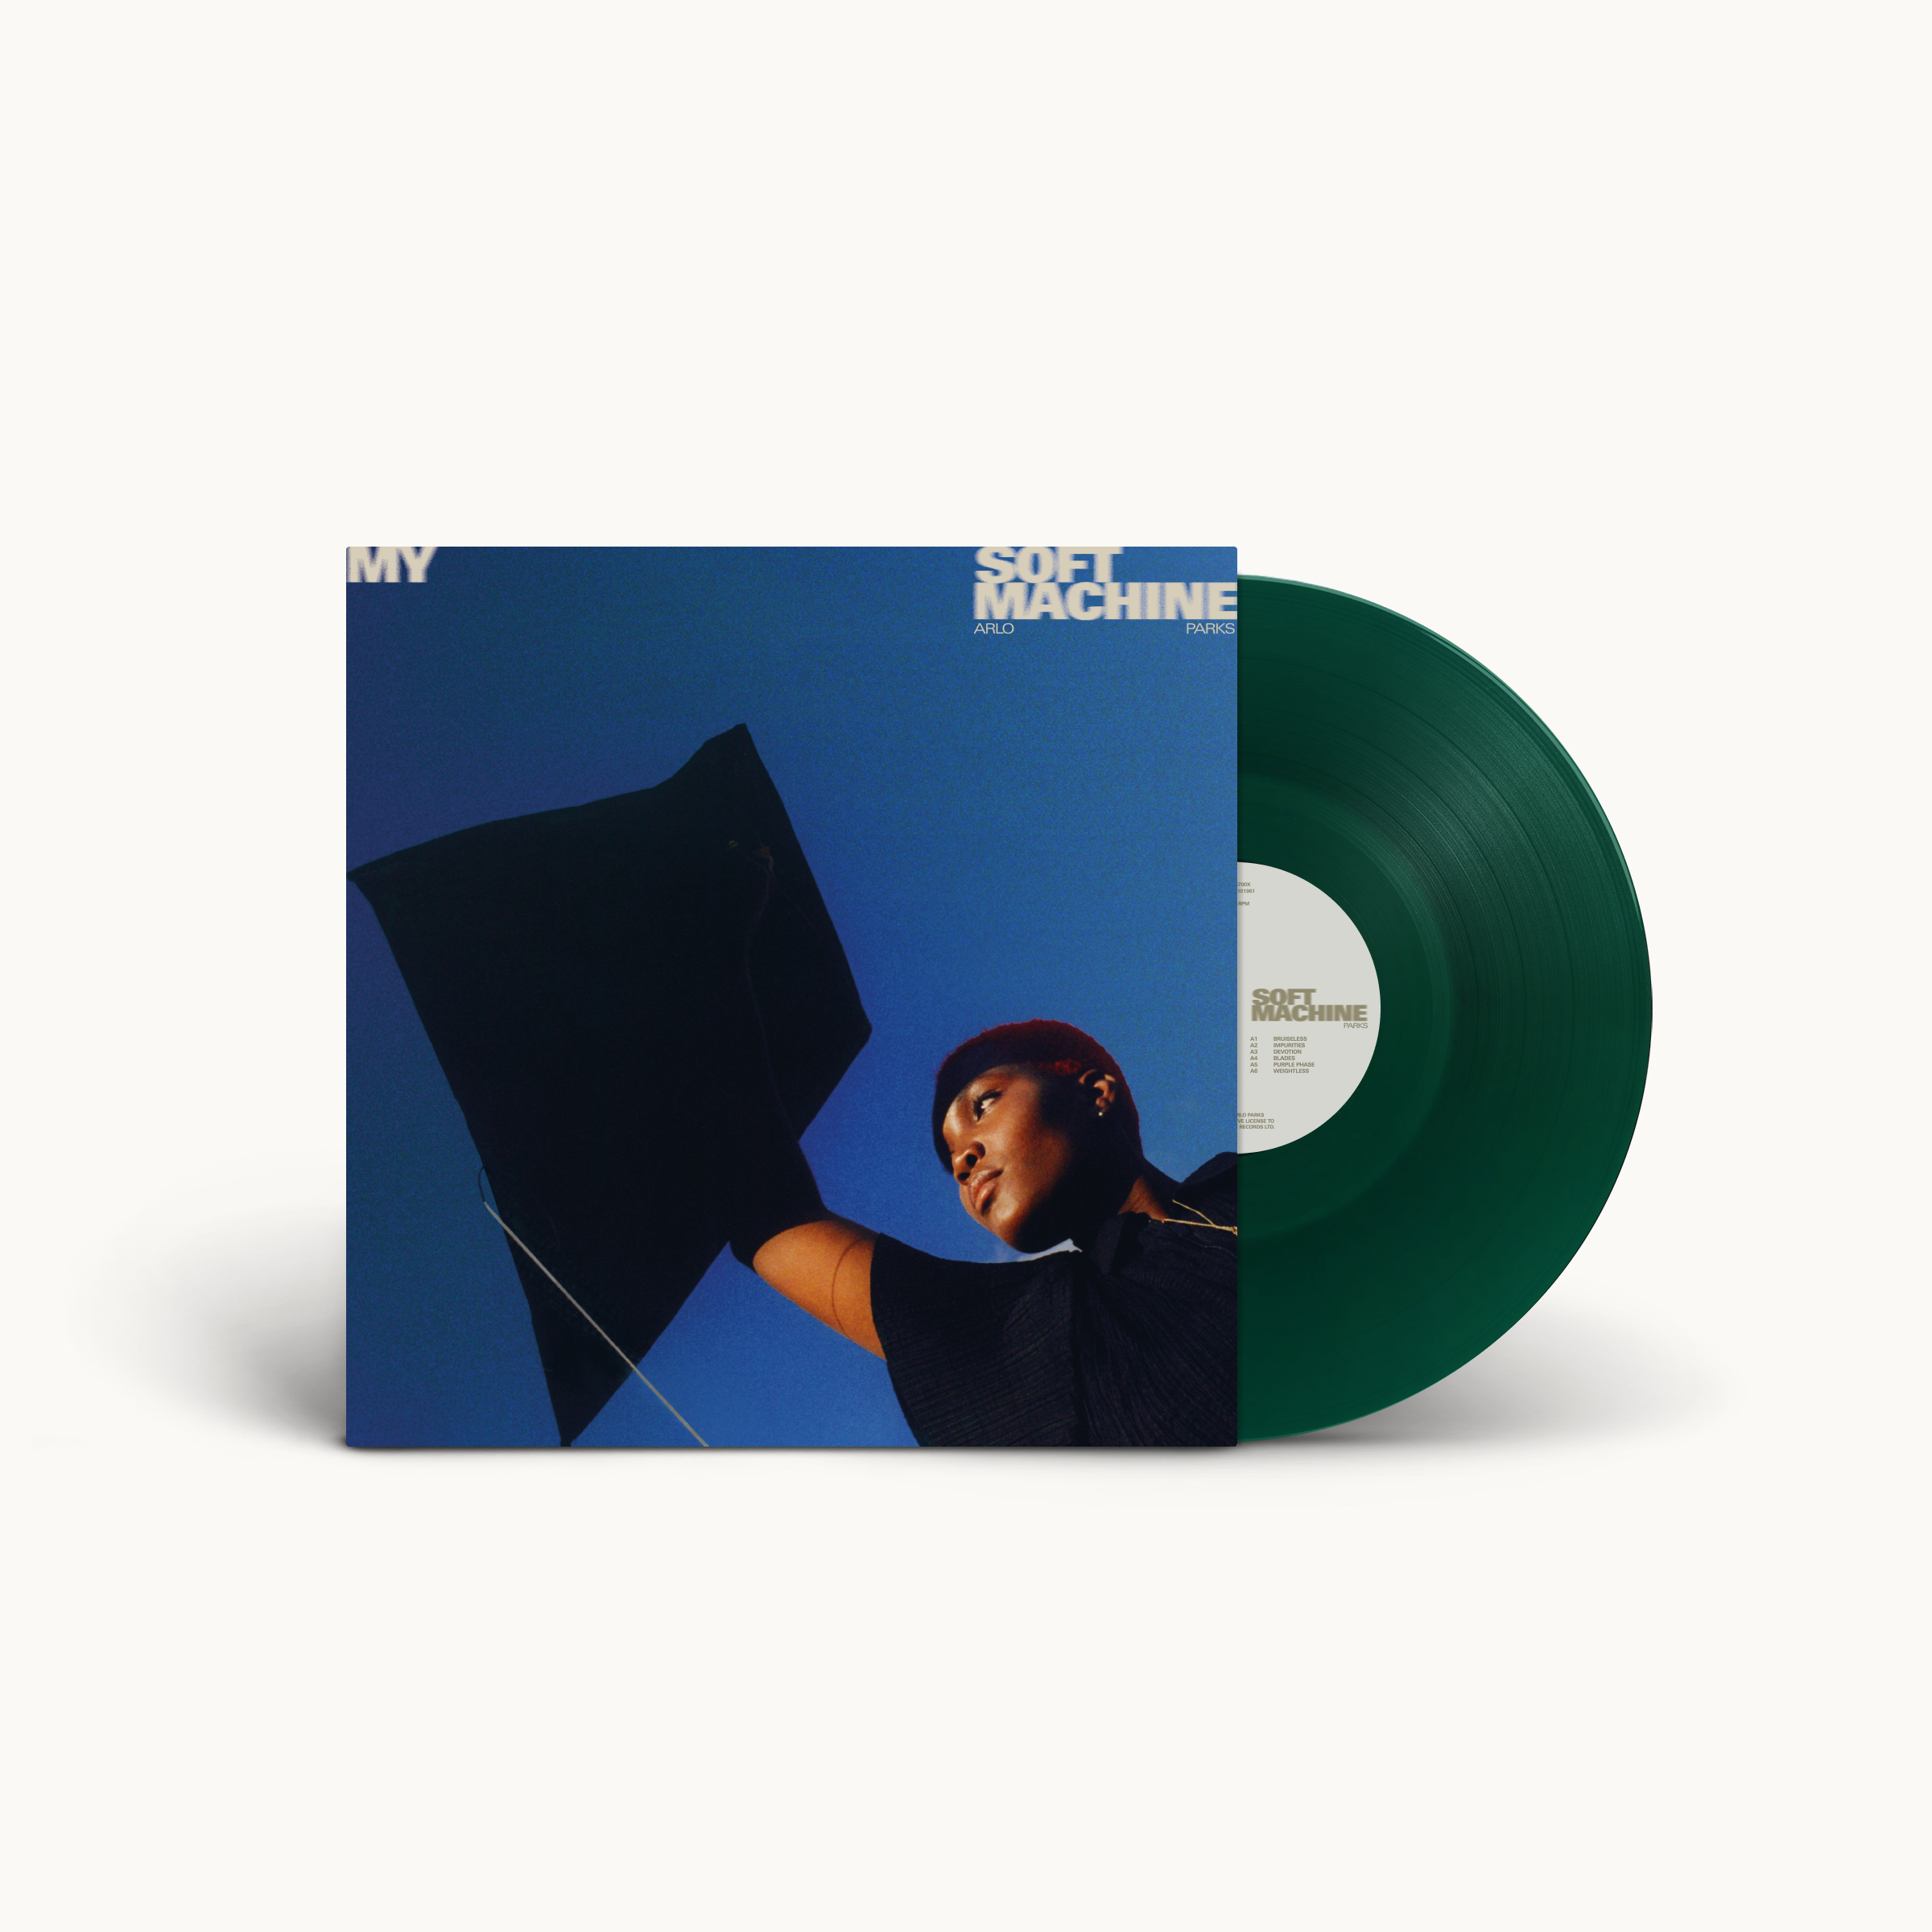 My Soft Machine: Limited Edition Green Vinyl LP + Exclusive Signed Insert